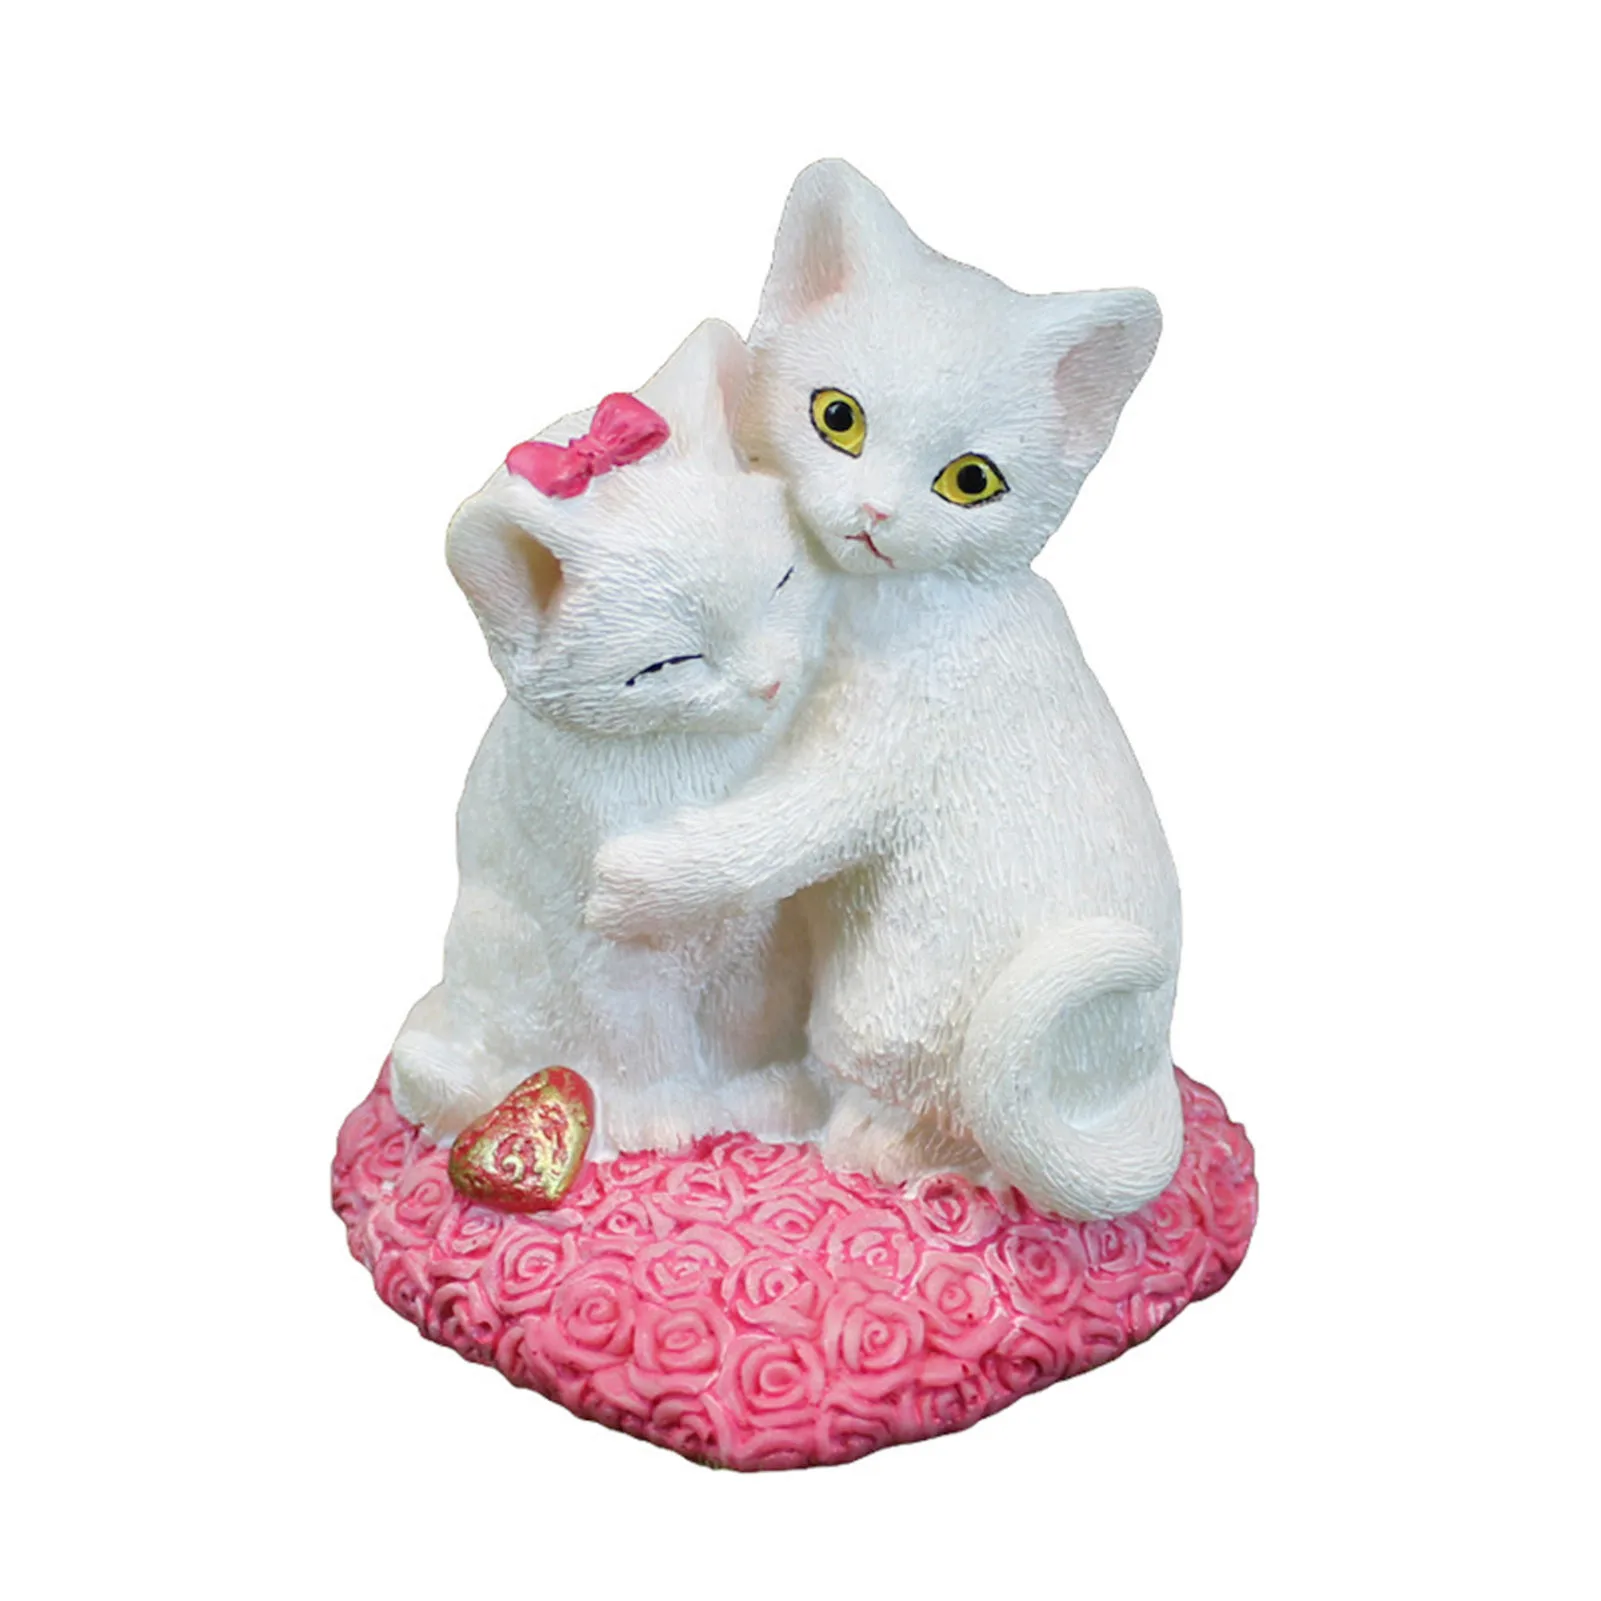 

Cat Figurine Cat Couple Statue Resin Animal Vivid Sculpture Ornament Funny Collectible Home Living Room Decorations Crafts Cat